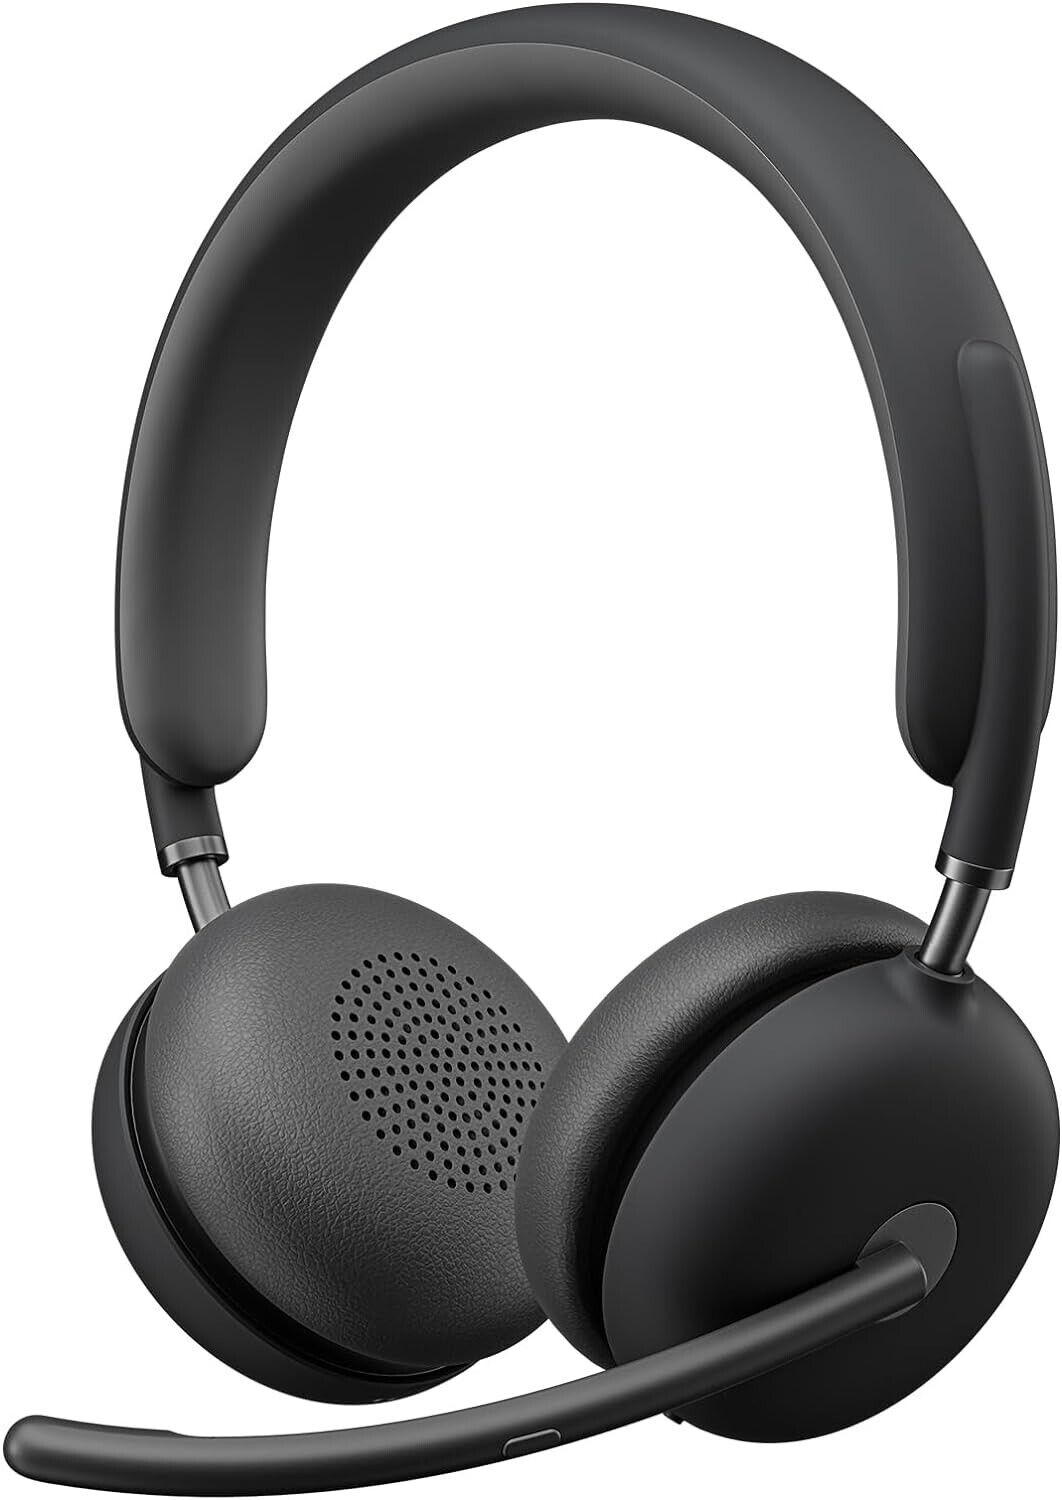 Logitech - Zone 950 Wireless Active Noise-Cancelling On-Ear Headset - Graphite